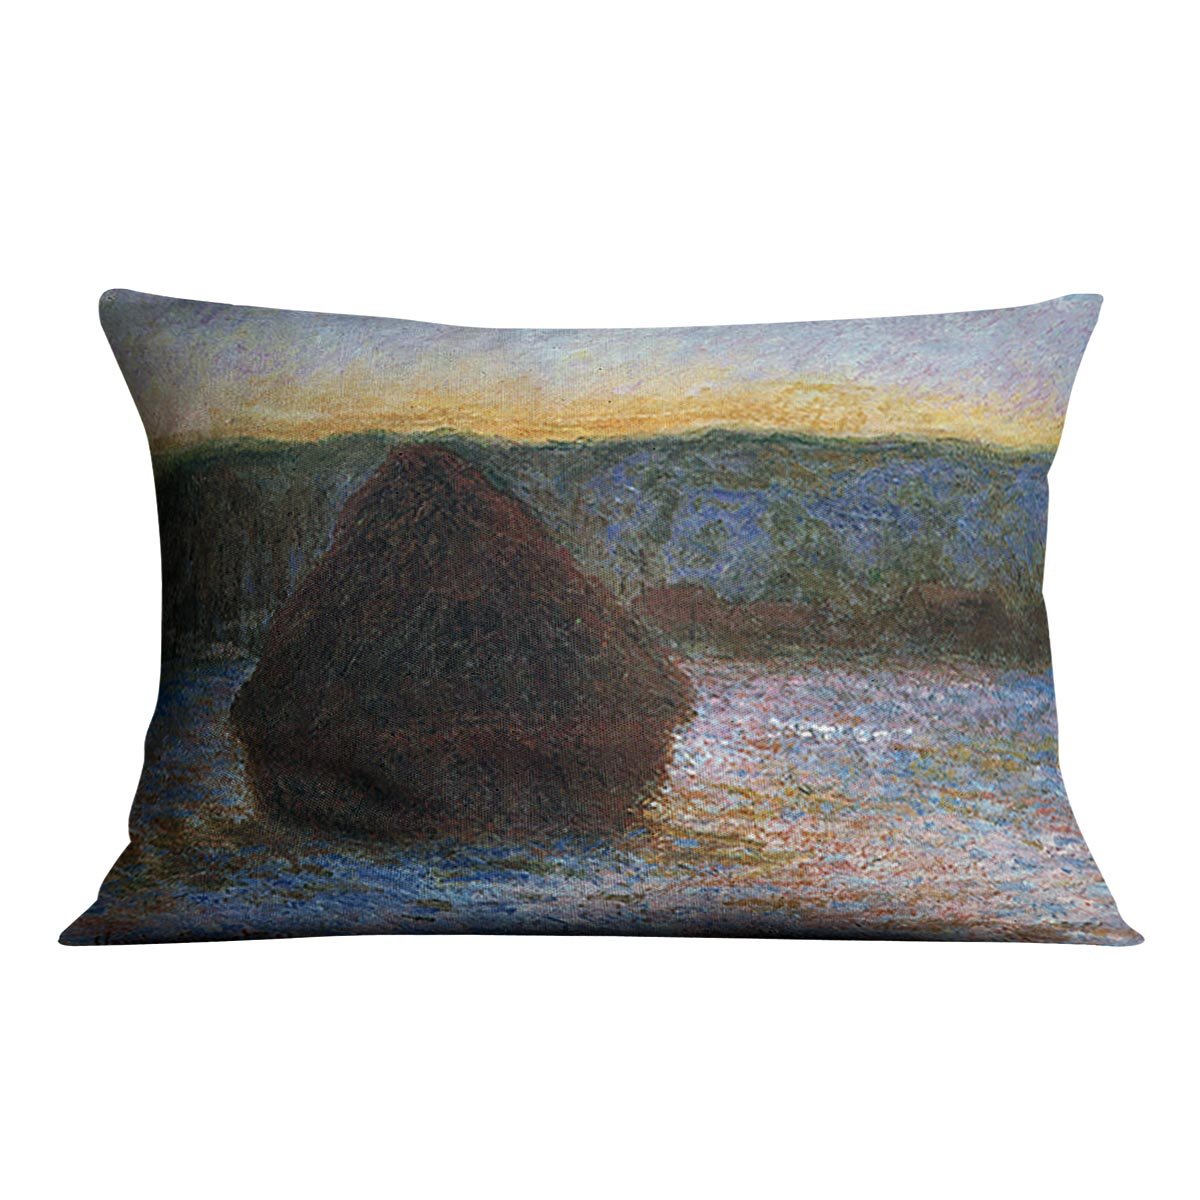 Haylofts thaw sunset by Monet Throw Pillow